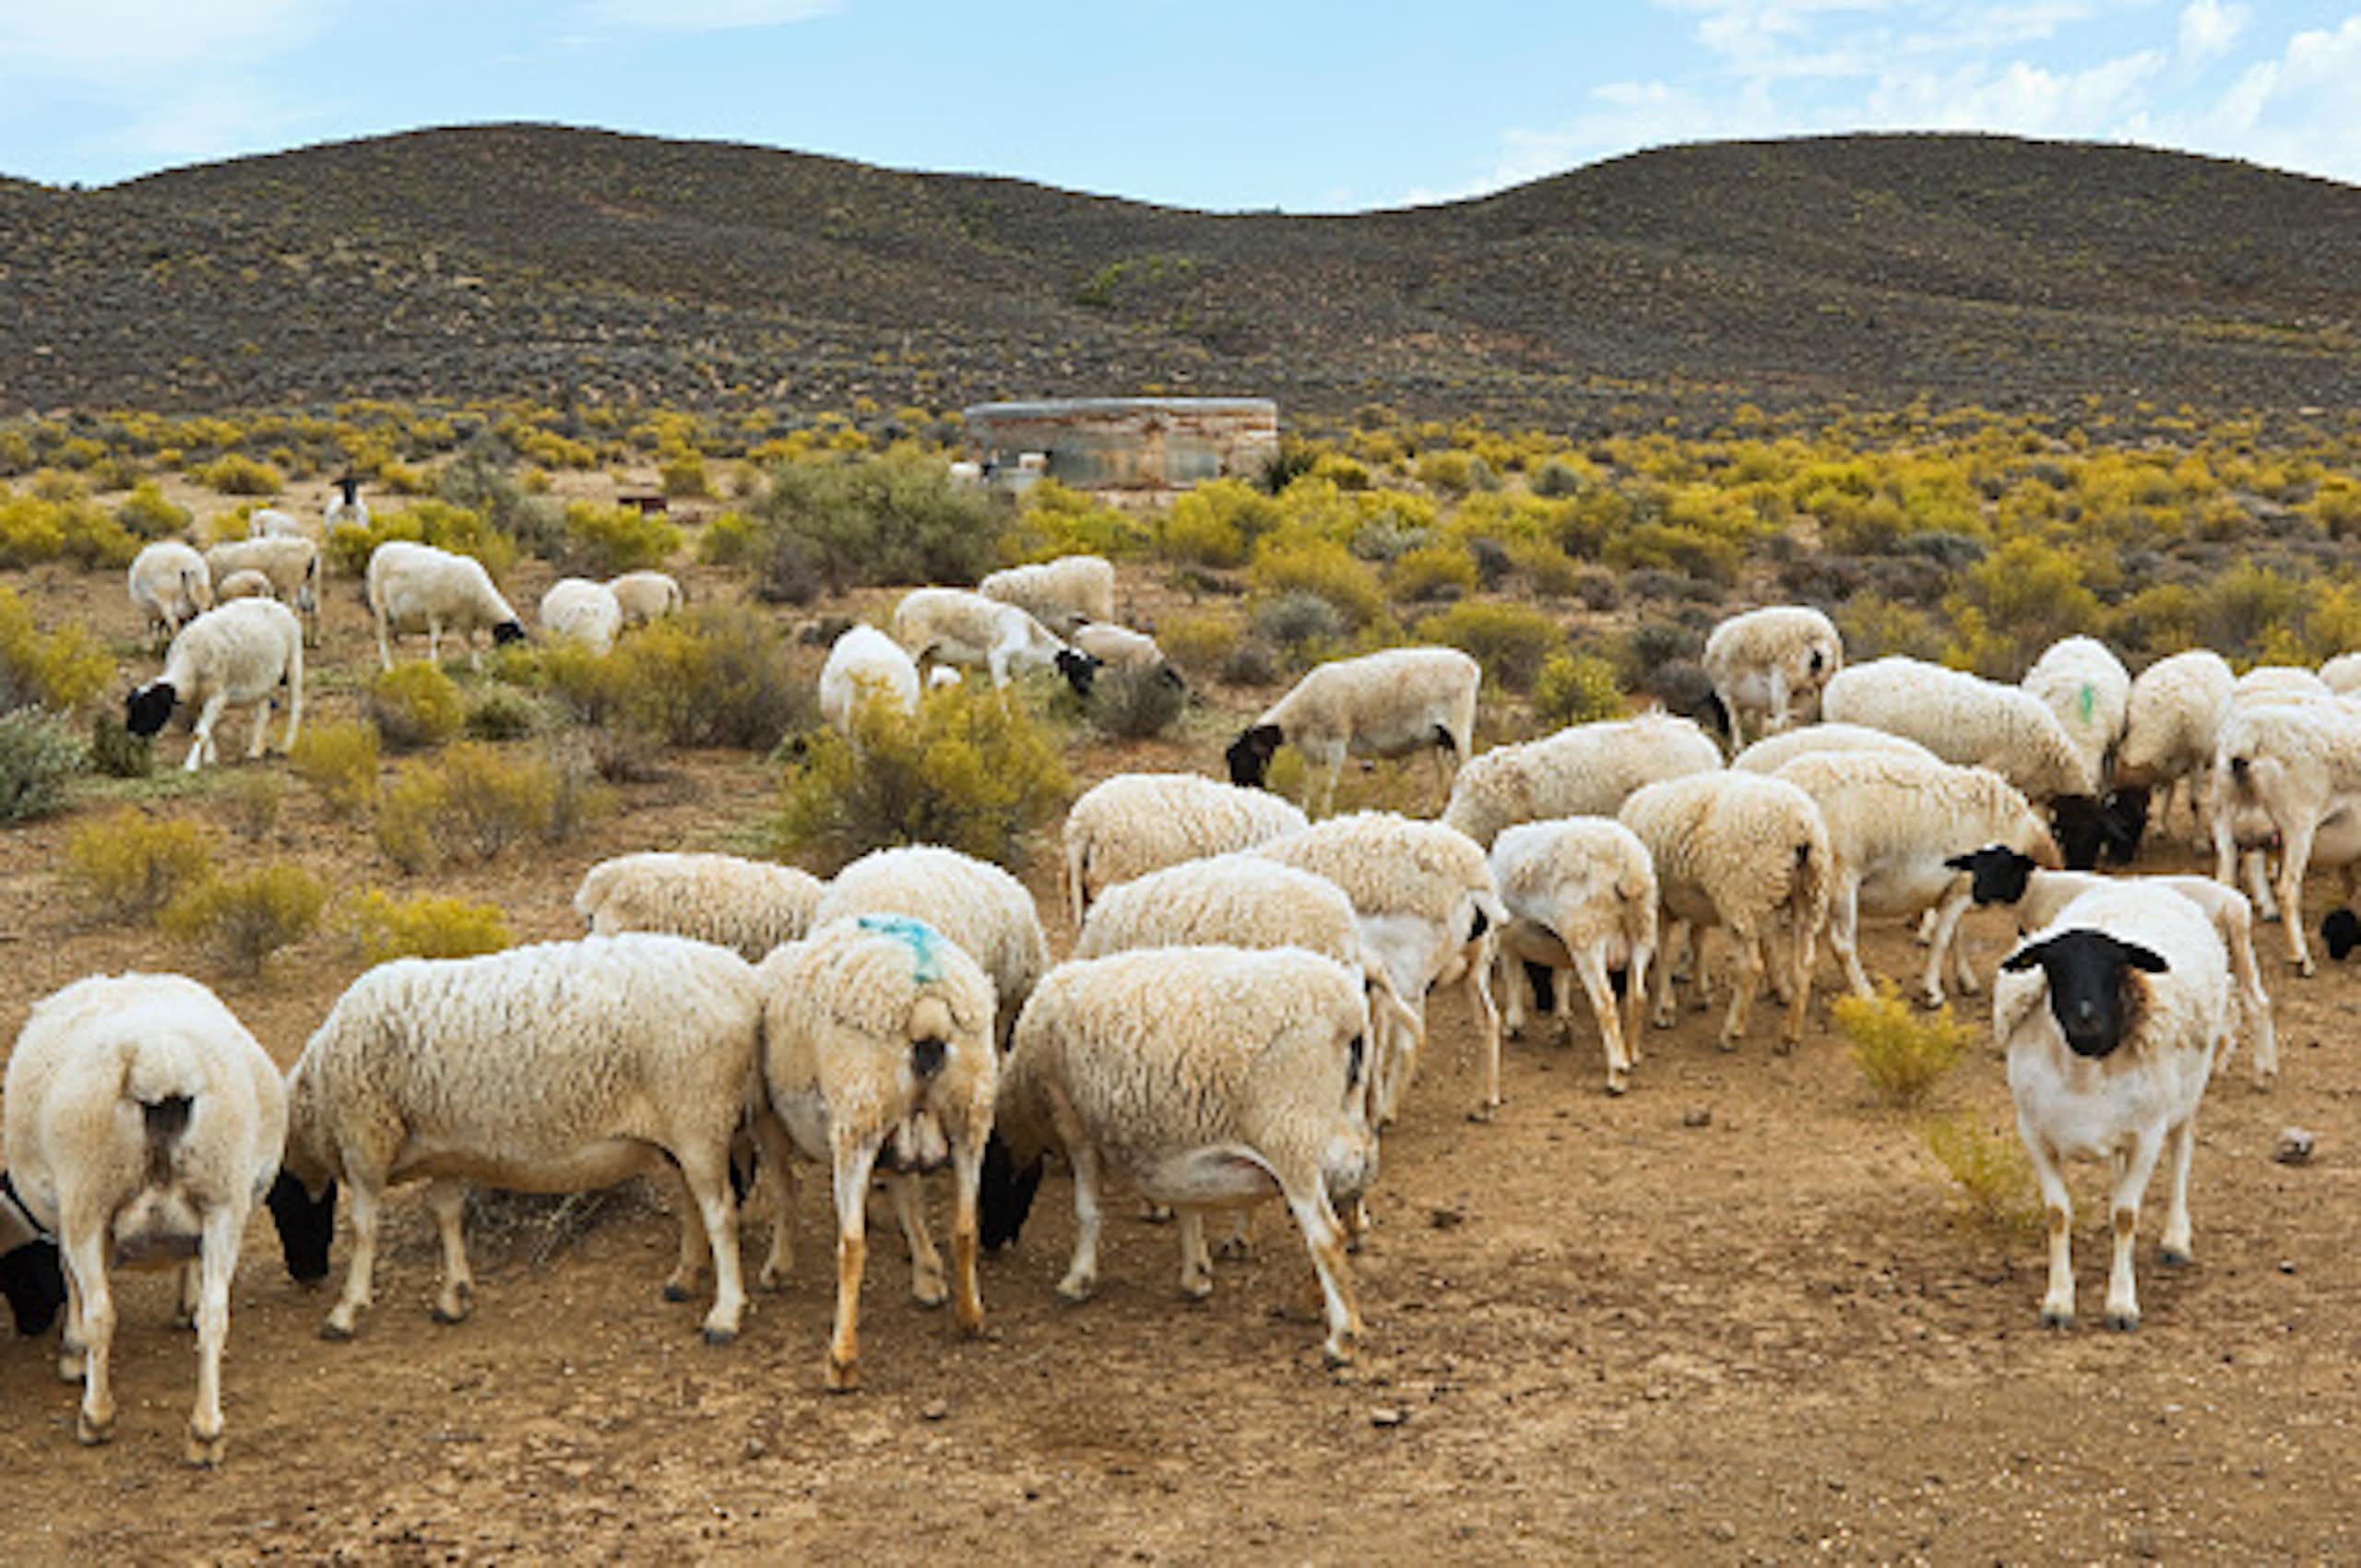 Sheep in a dry landscape where low bushes are growing